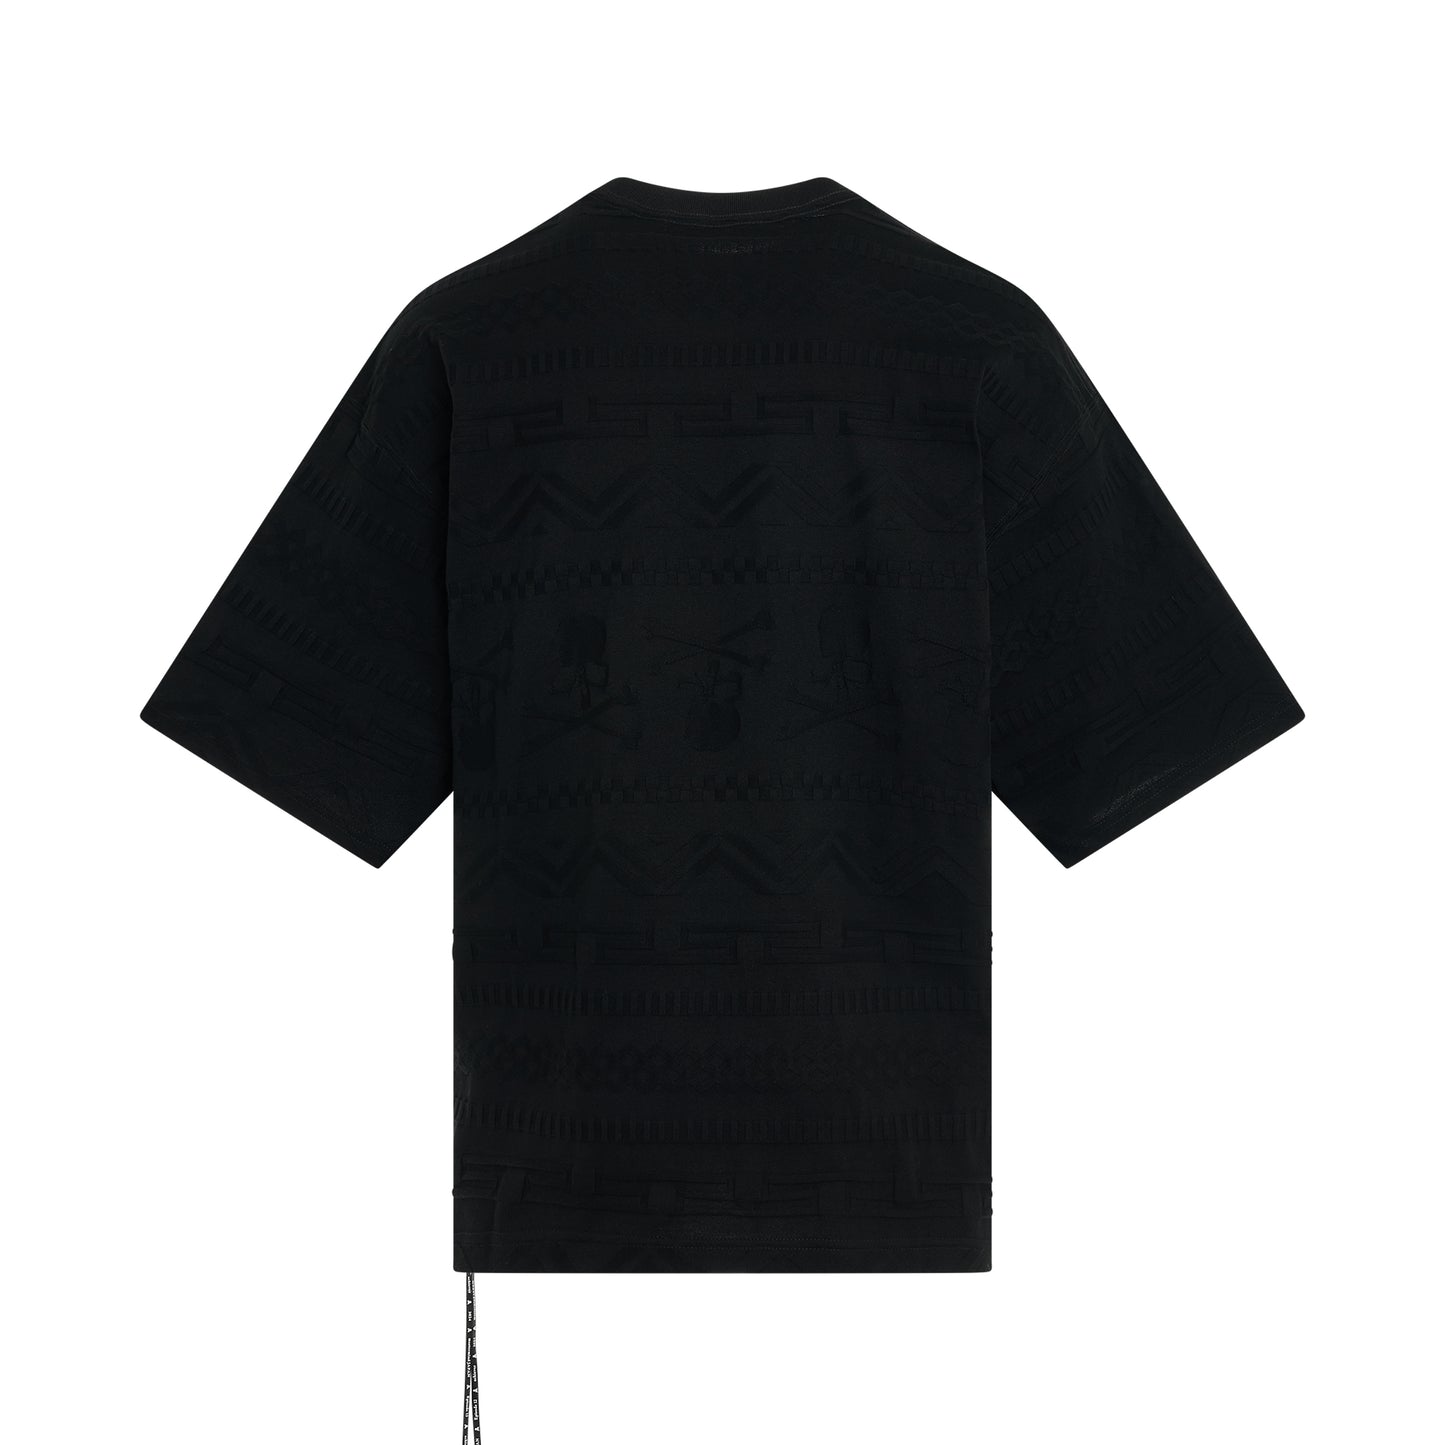 Links Jacquard Boxy Fit T-Shirt in Black